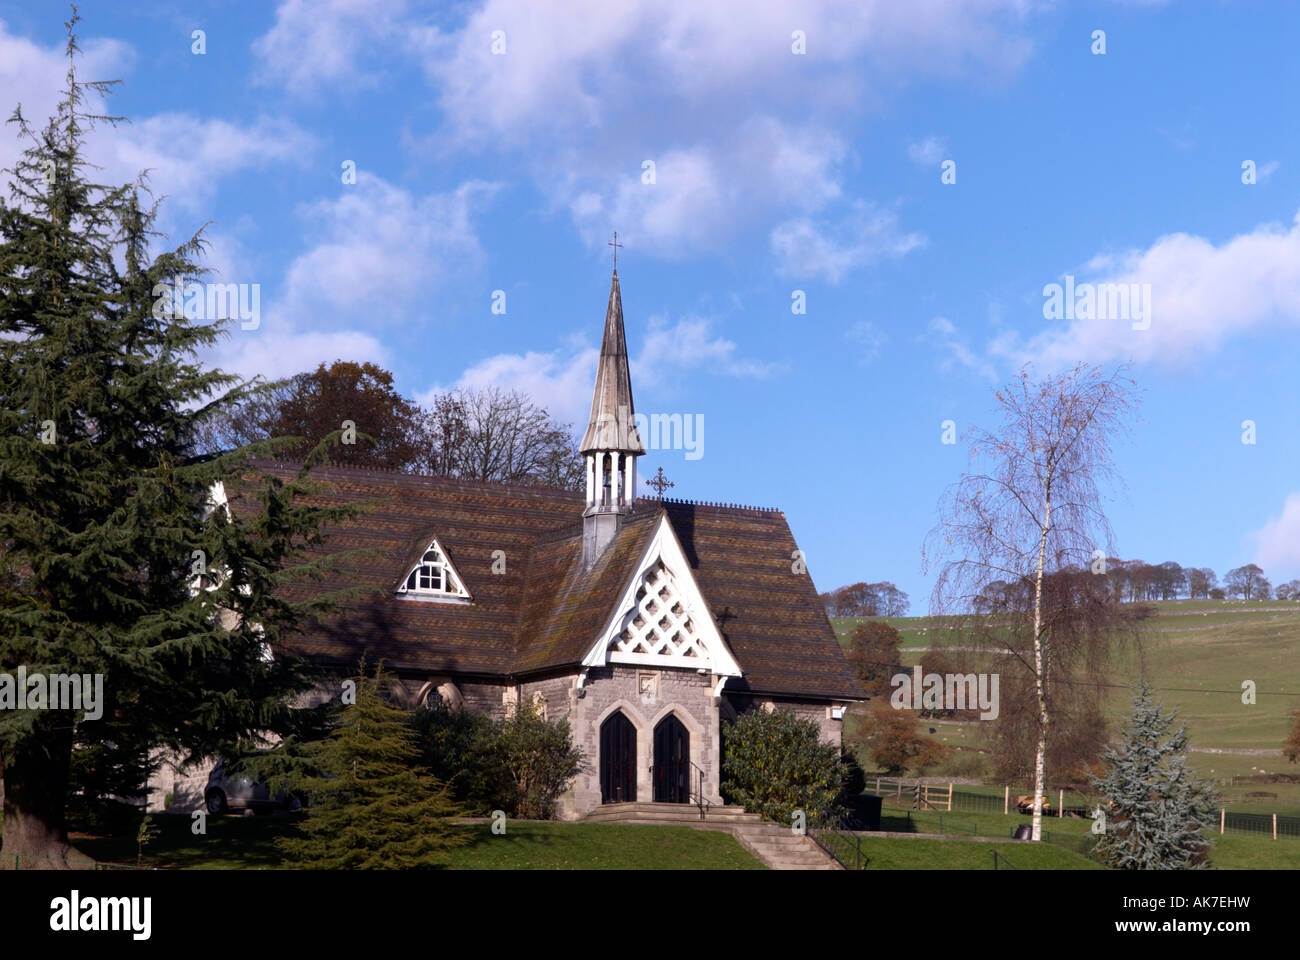 'Swiss Chalet' style schoolhouse at Ilam in Staffordshire 'Great Britain' Stock Photo